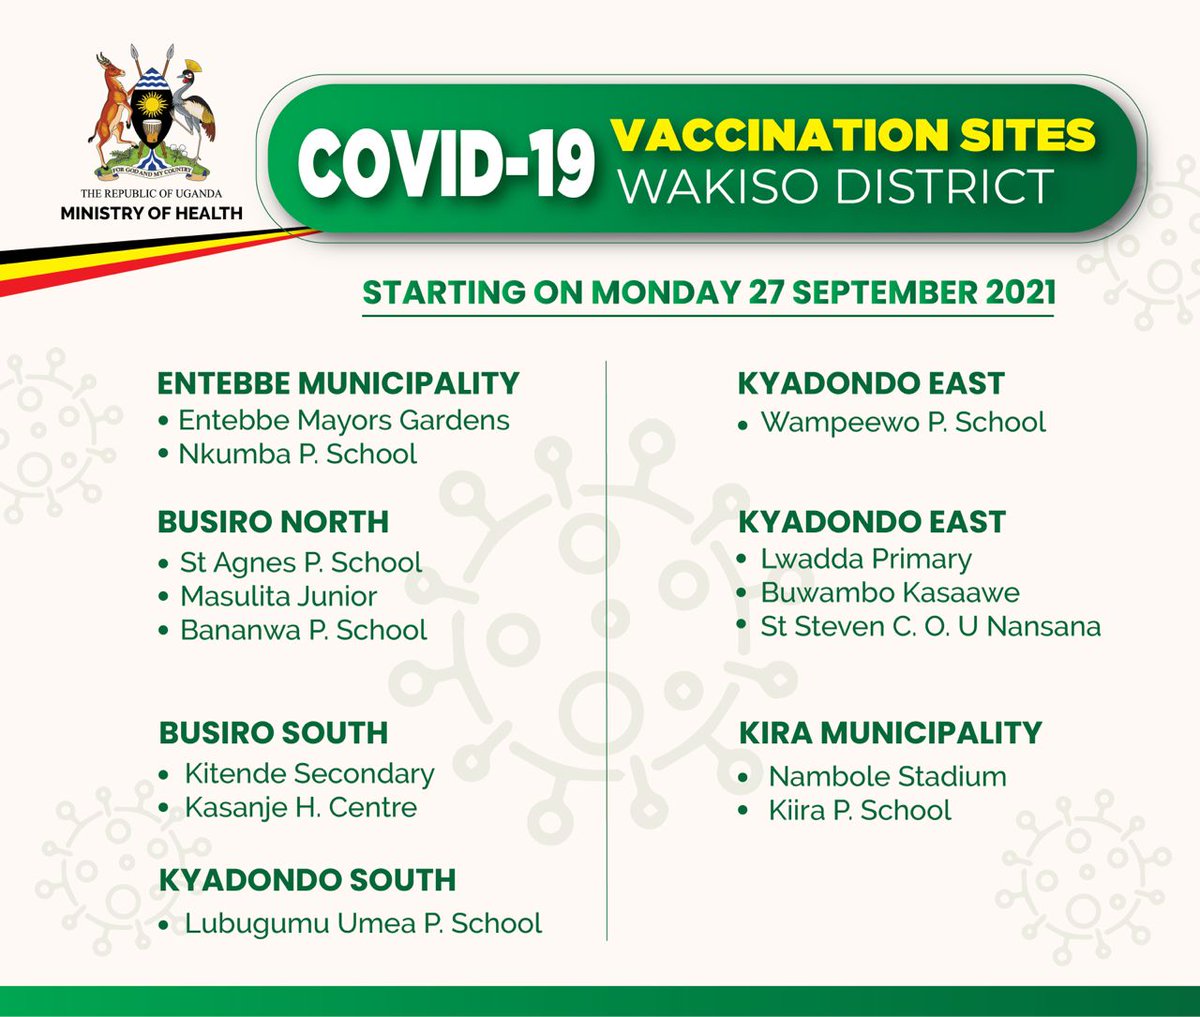 The vaccine is your best shot in the fight against COVID19. Get Vaccinated at any of these vaccination centers in Kampala, Wakiso and Mukono Districts. 

#Covid19UG #KijjaKuggwa  #GetVaccinatedUG